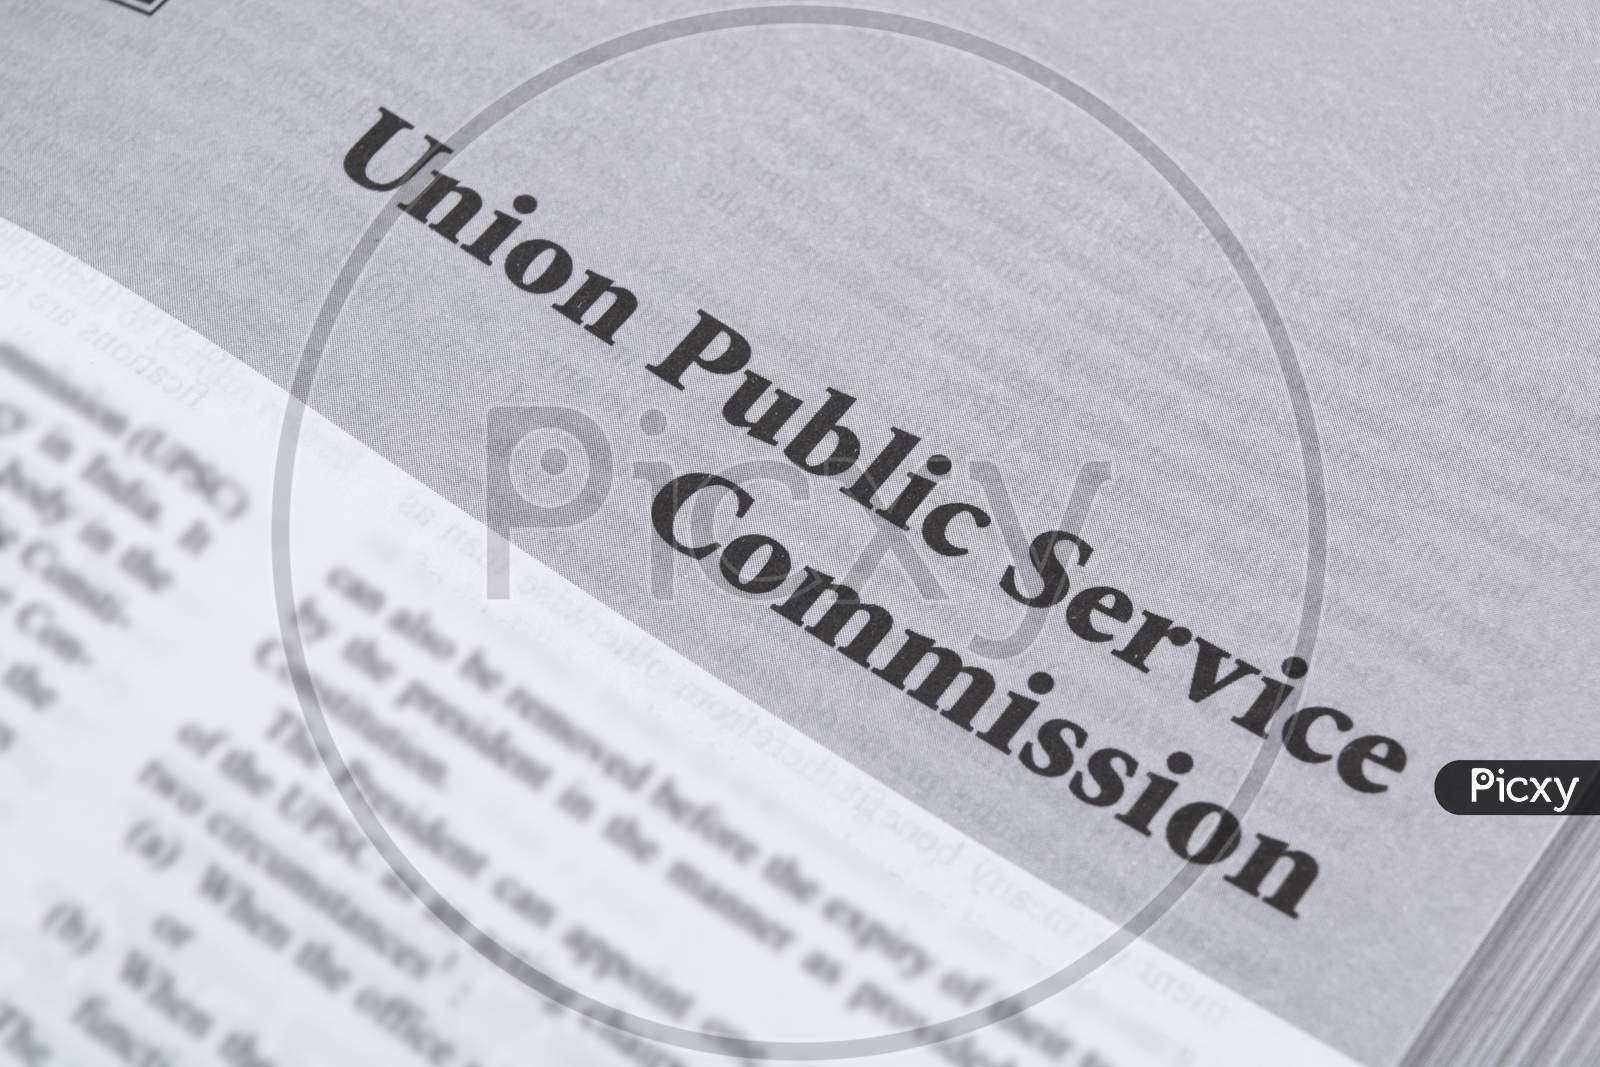 Union Public Service Commission Printed In Book With Large Letters.